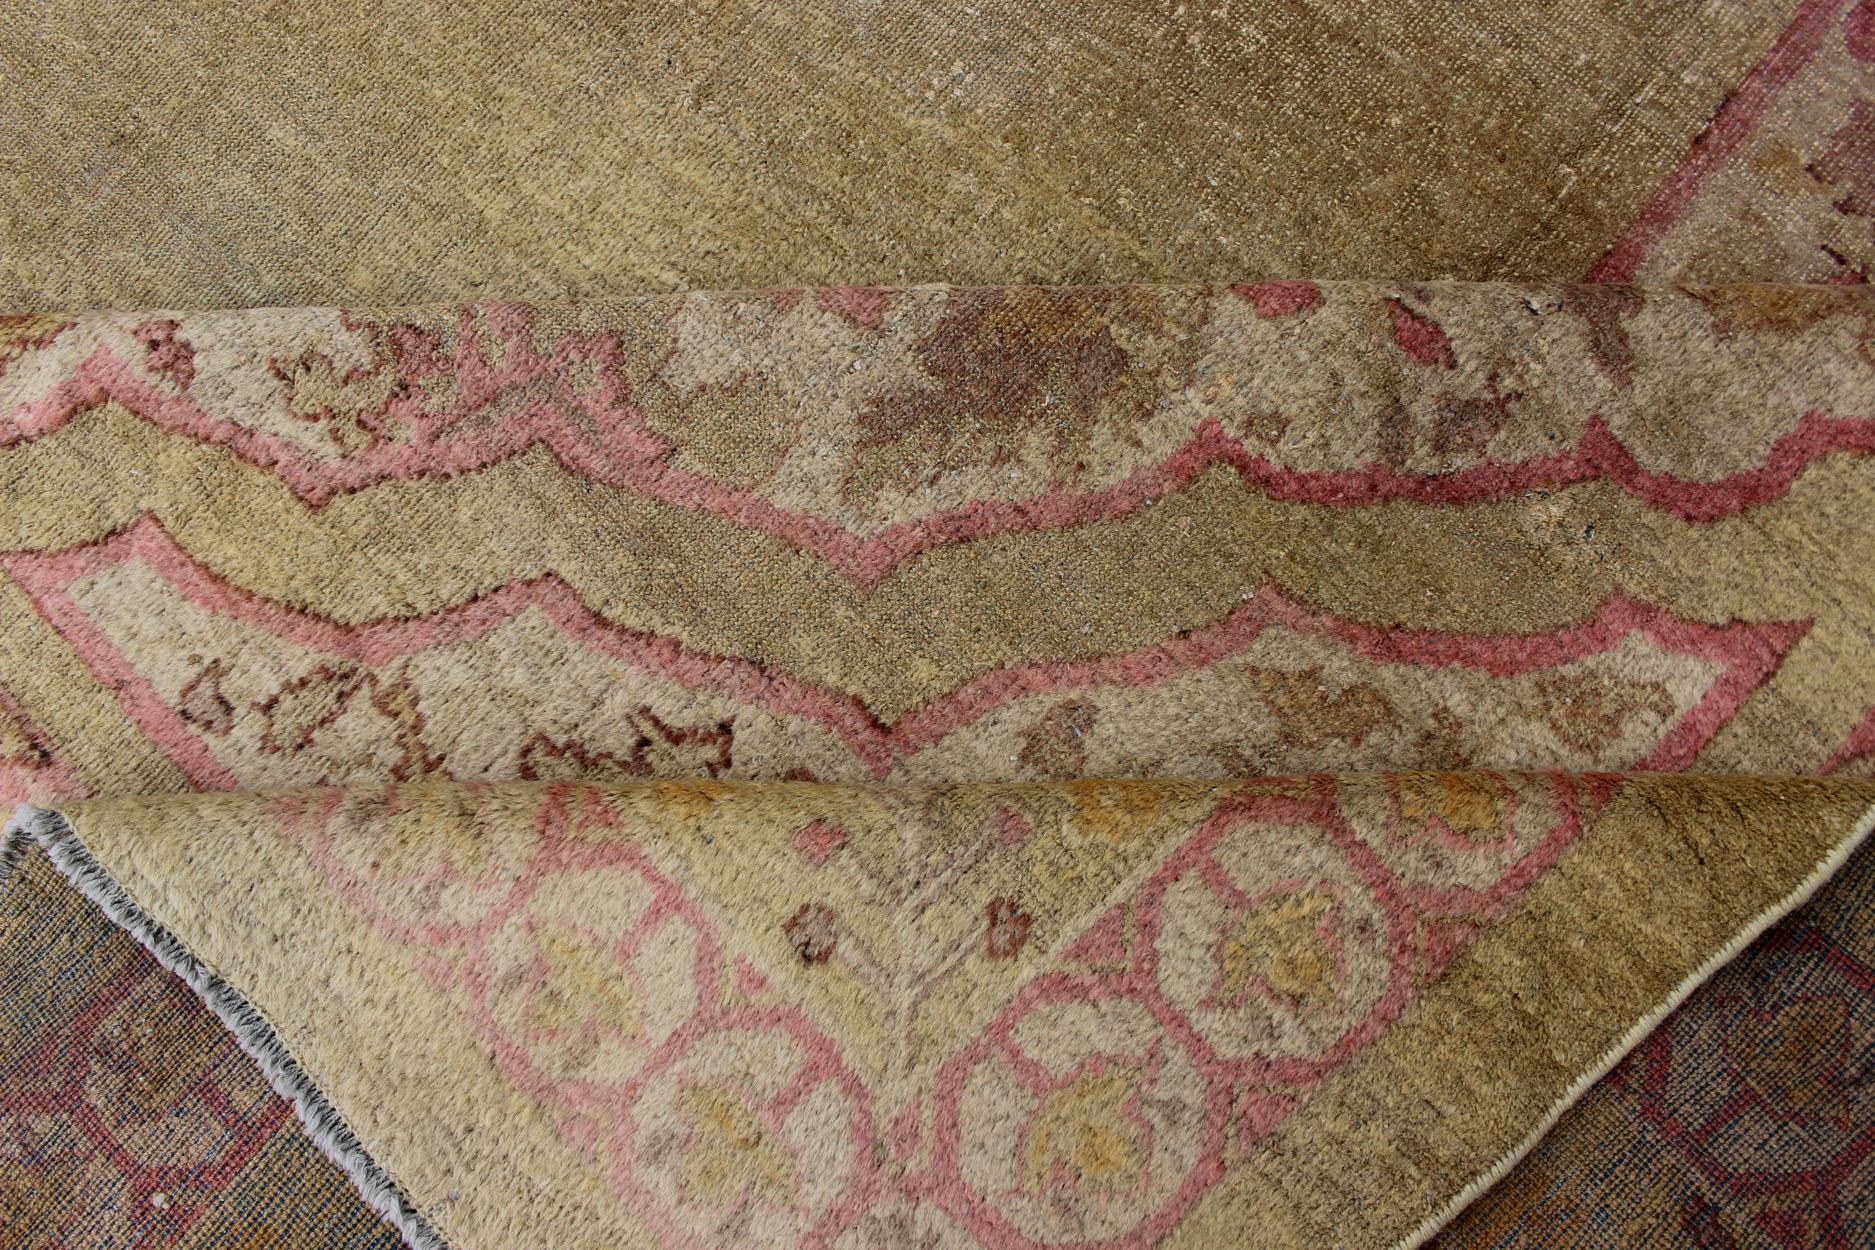 Antique Amritsar Rug With Medallion Design in Acidic-Yellow Green, Pink, Ivory In Good Condition For Sale In Atlanta, GA